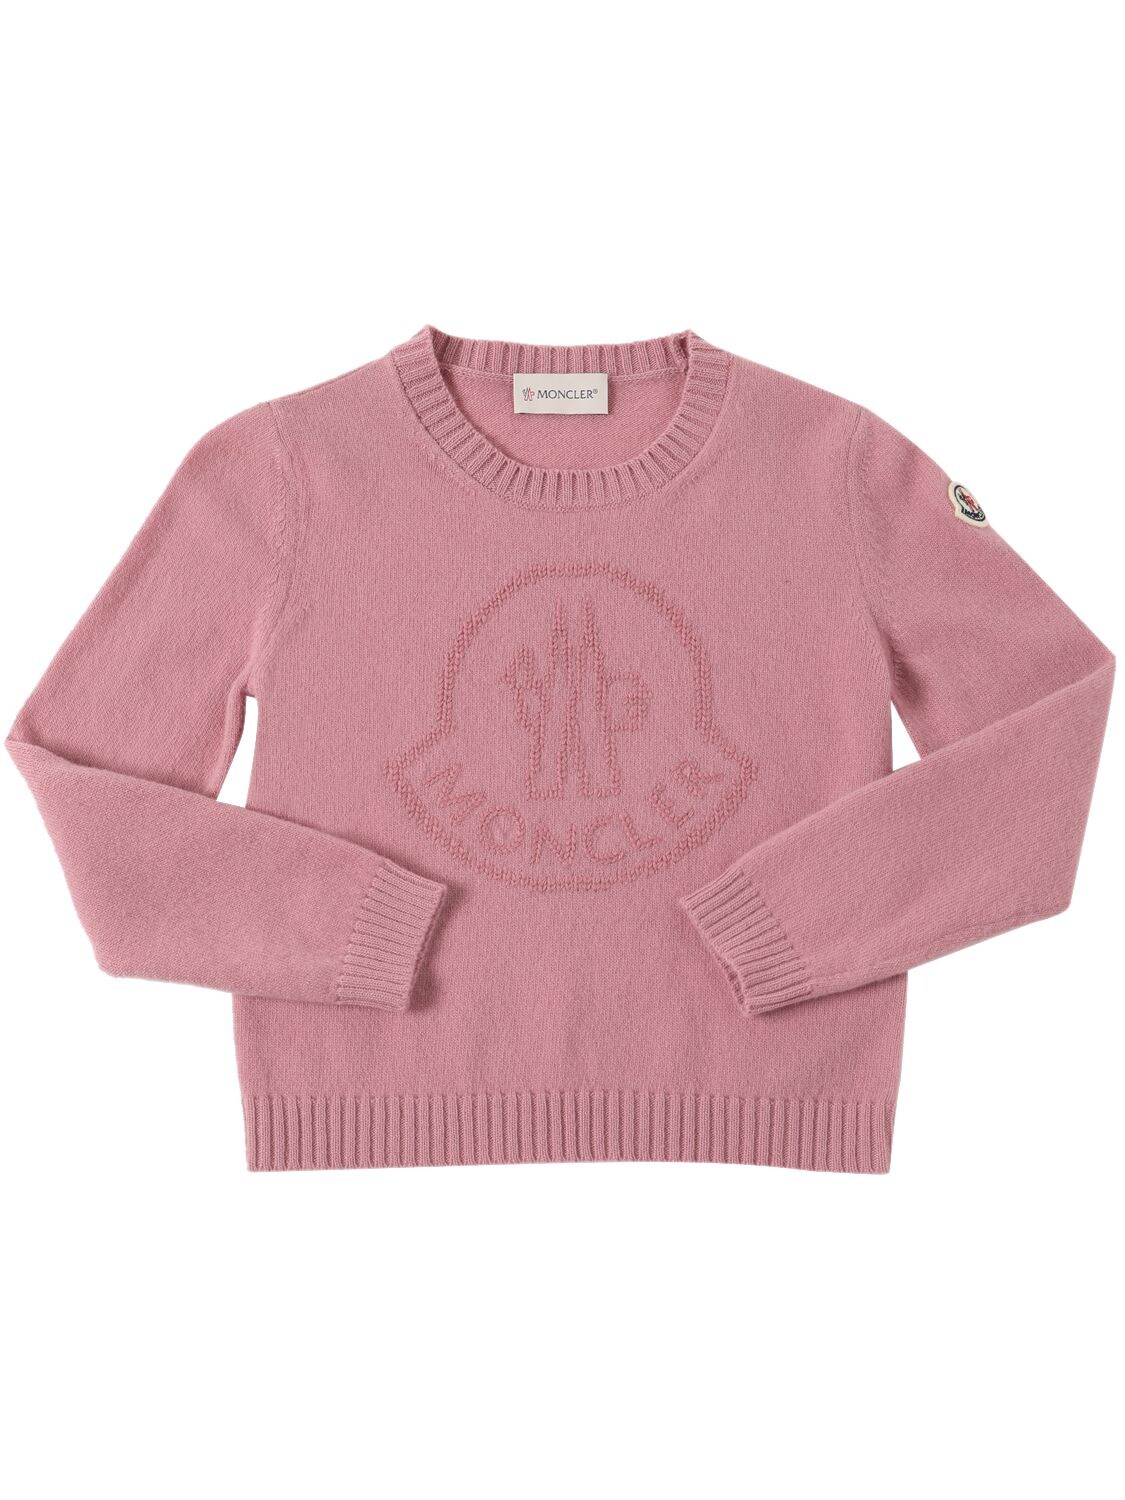 MONCLER LOGO CARDED WOOL SWEATER